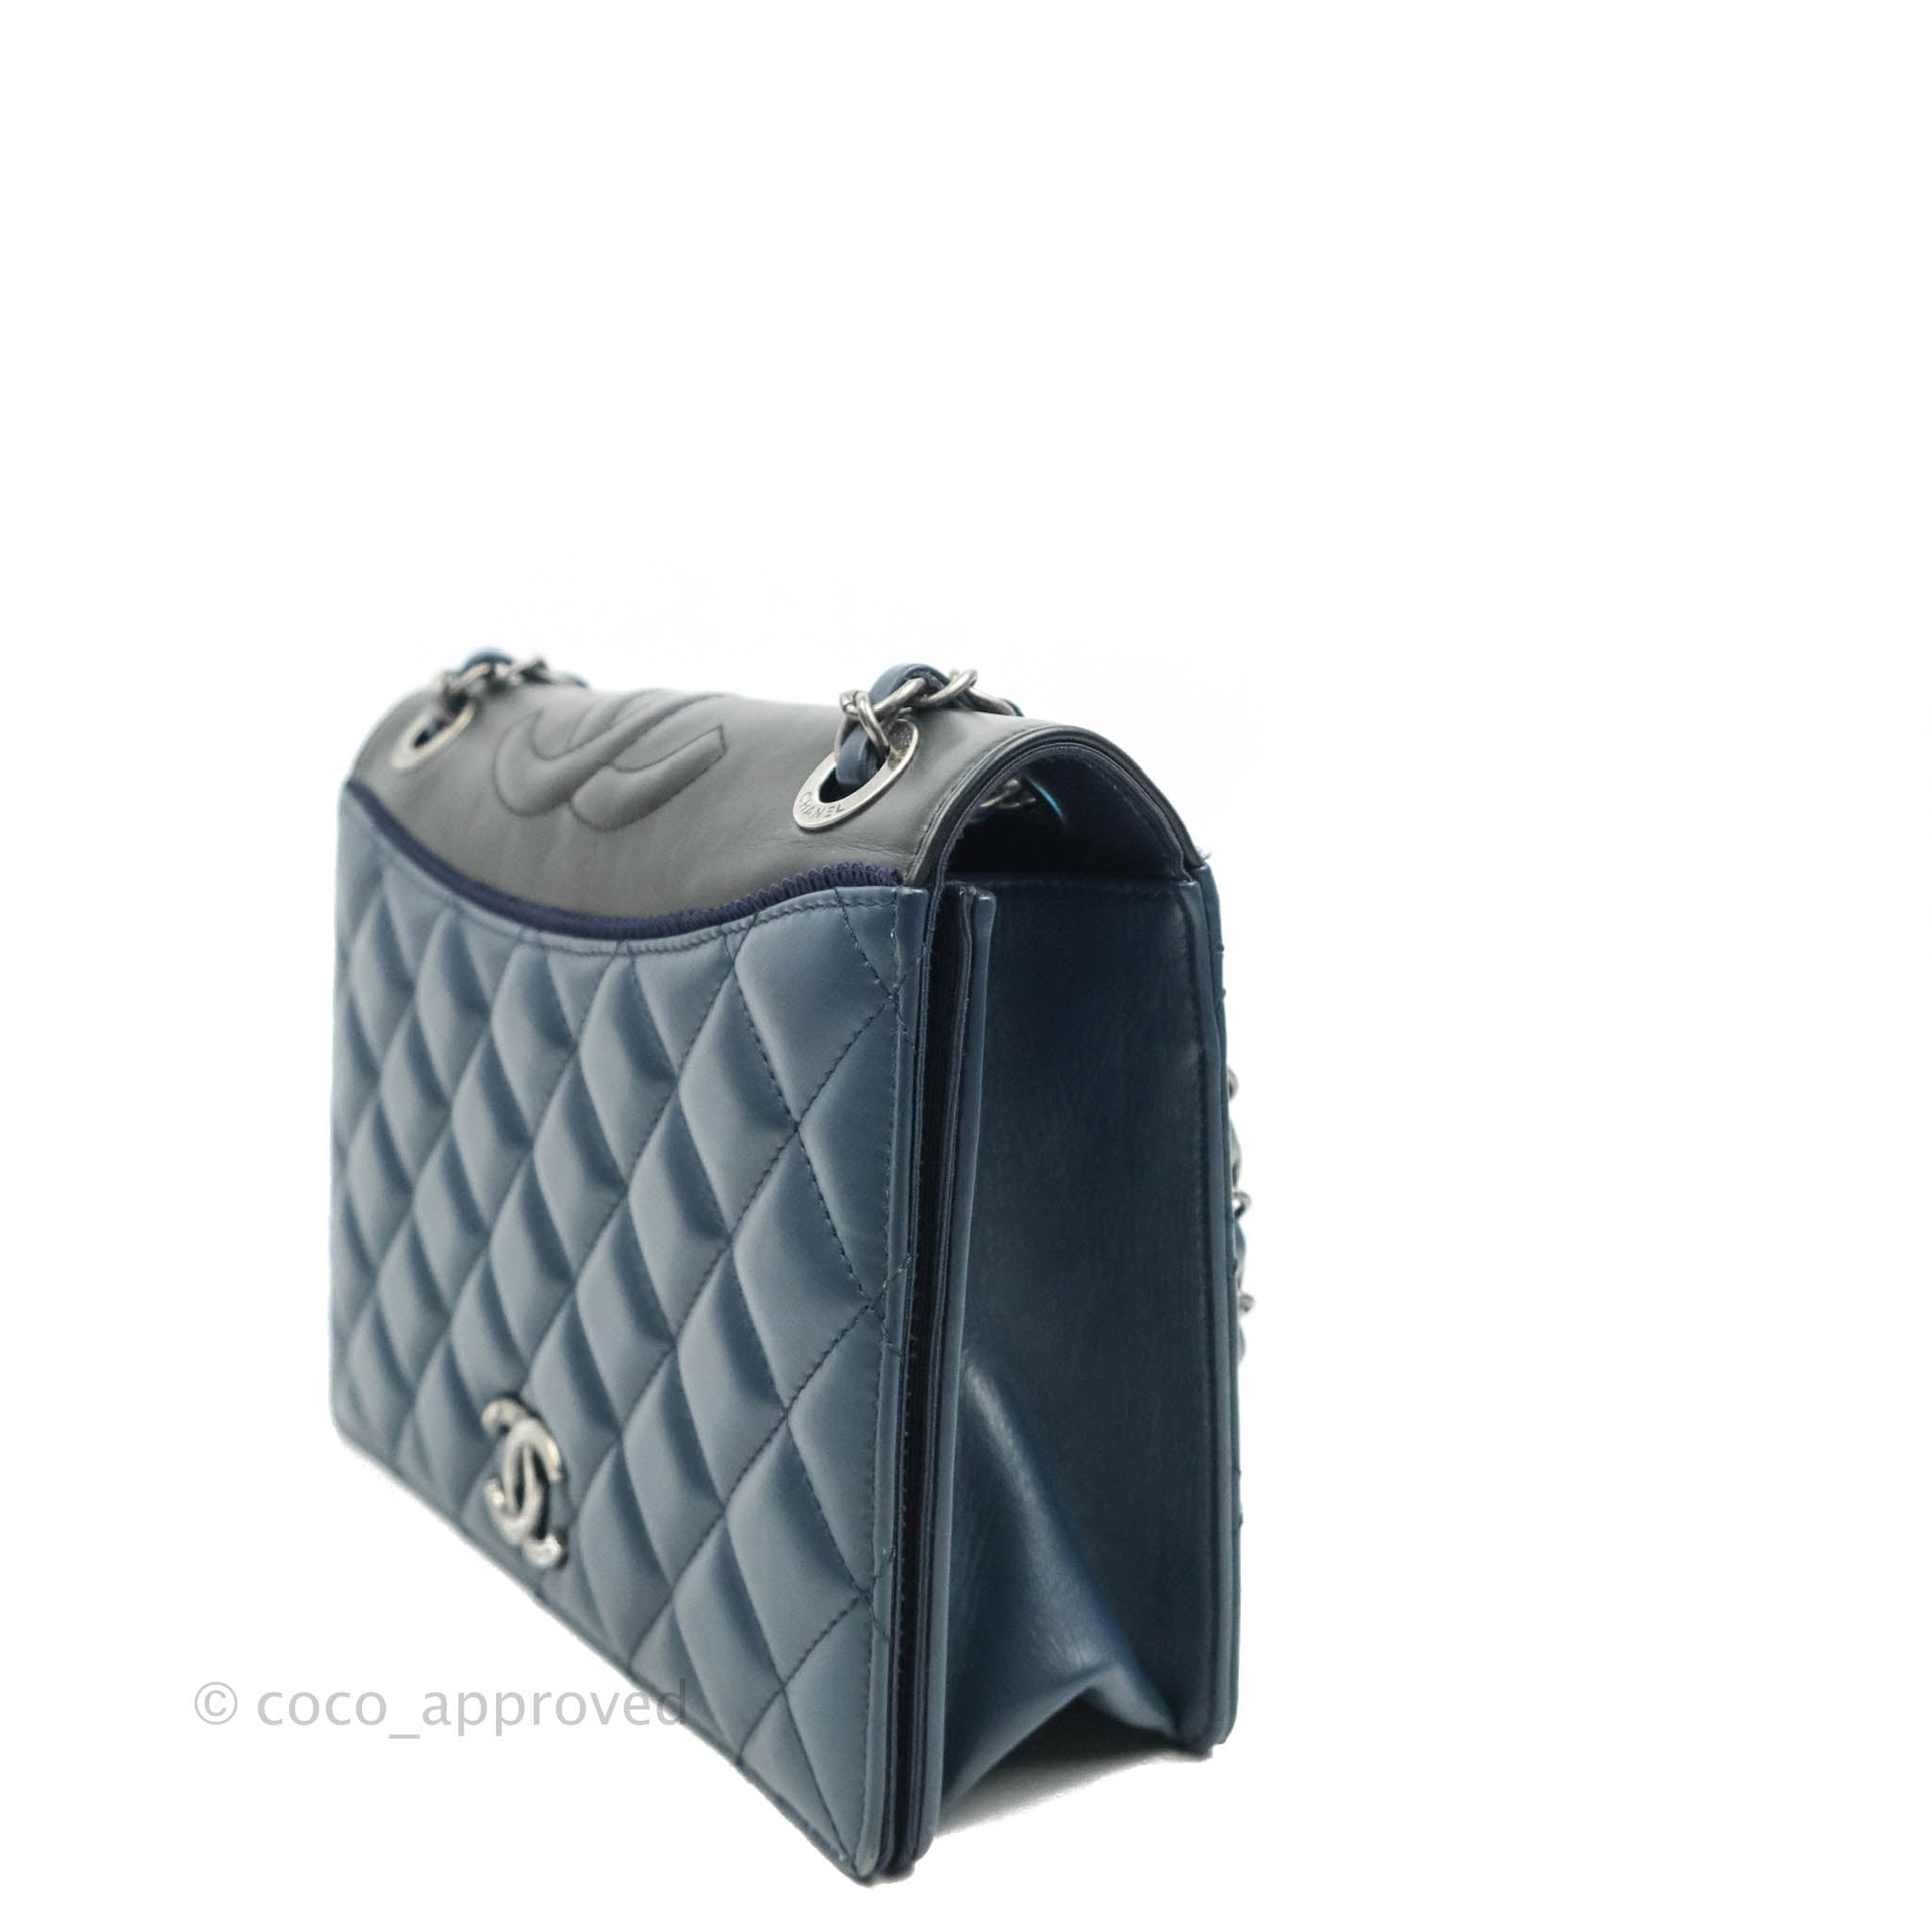 Chanel Quilted Ballerina Small Flap Bag Blue Black Ruthenium